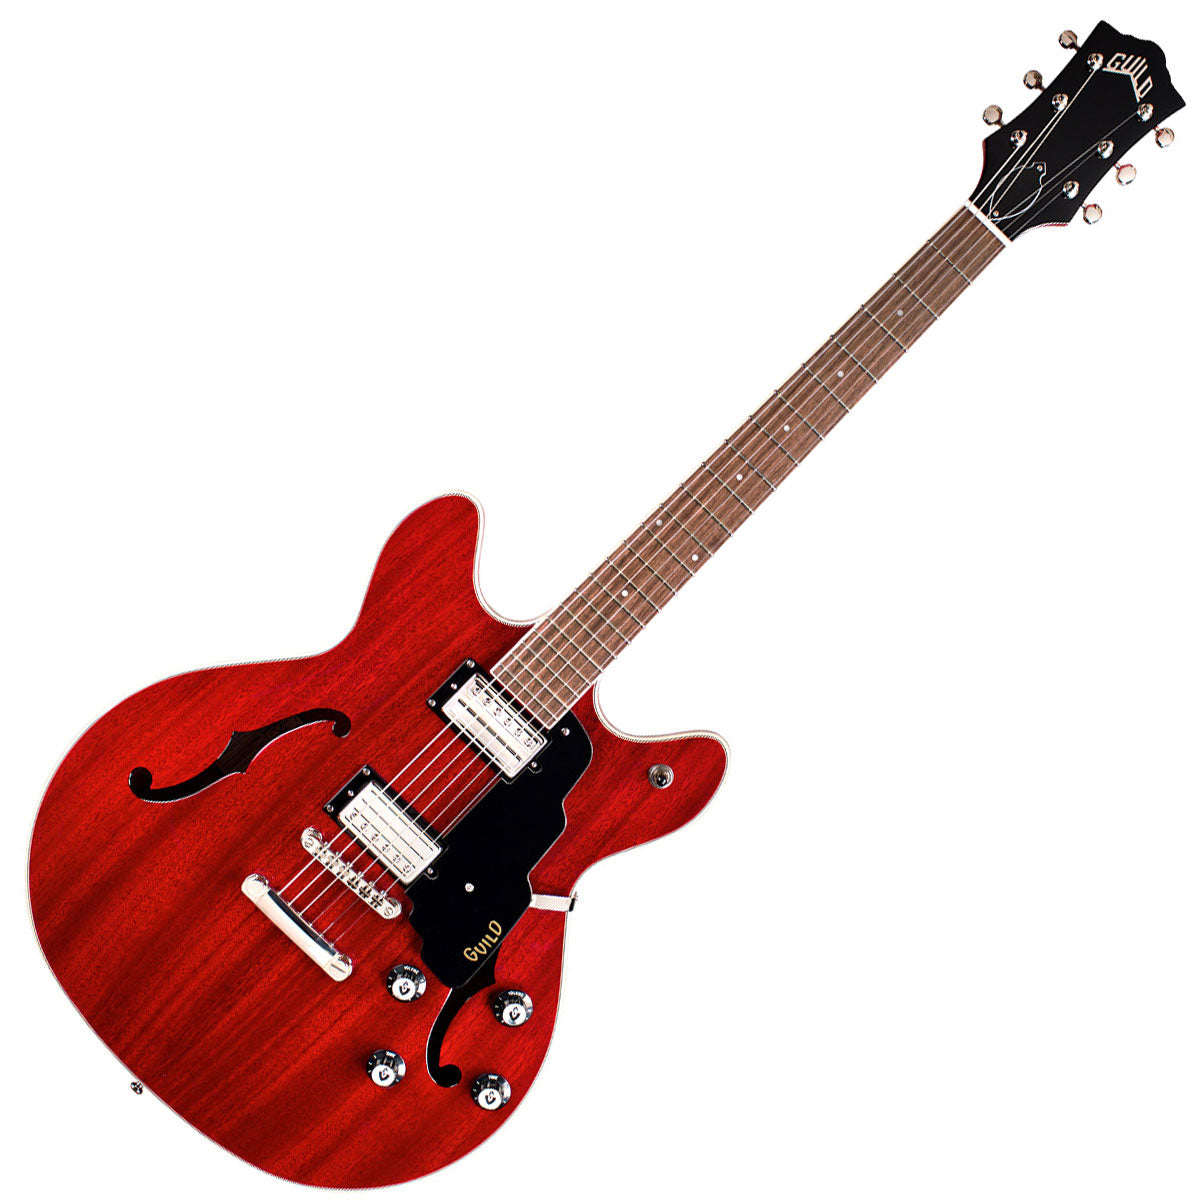 Guild Starfire DC Semi-hollow Electric Guitar - Cherry Red